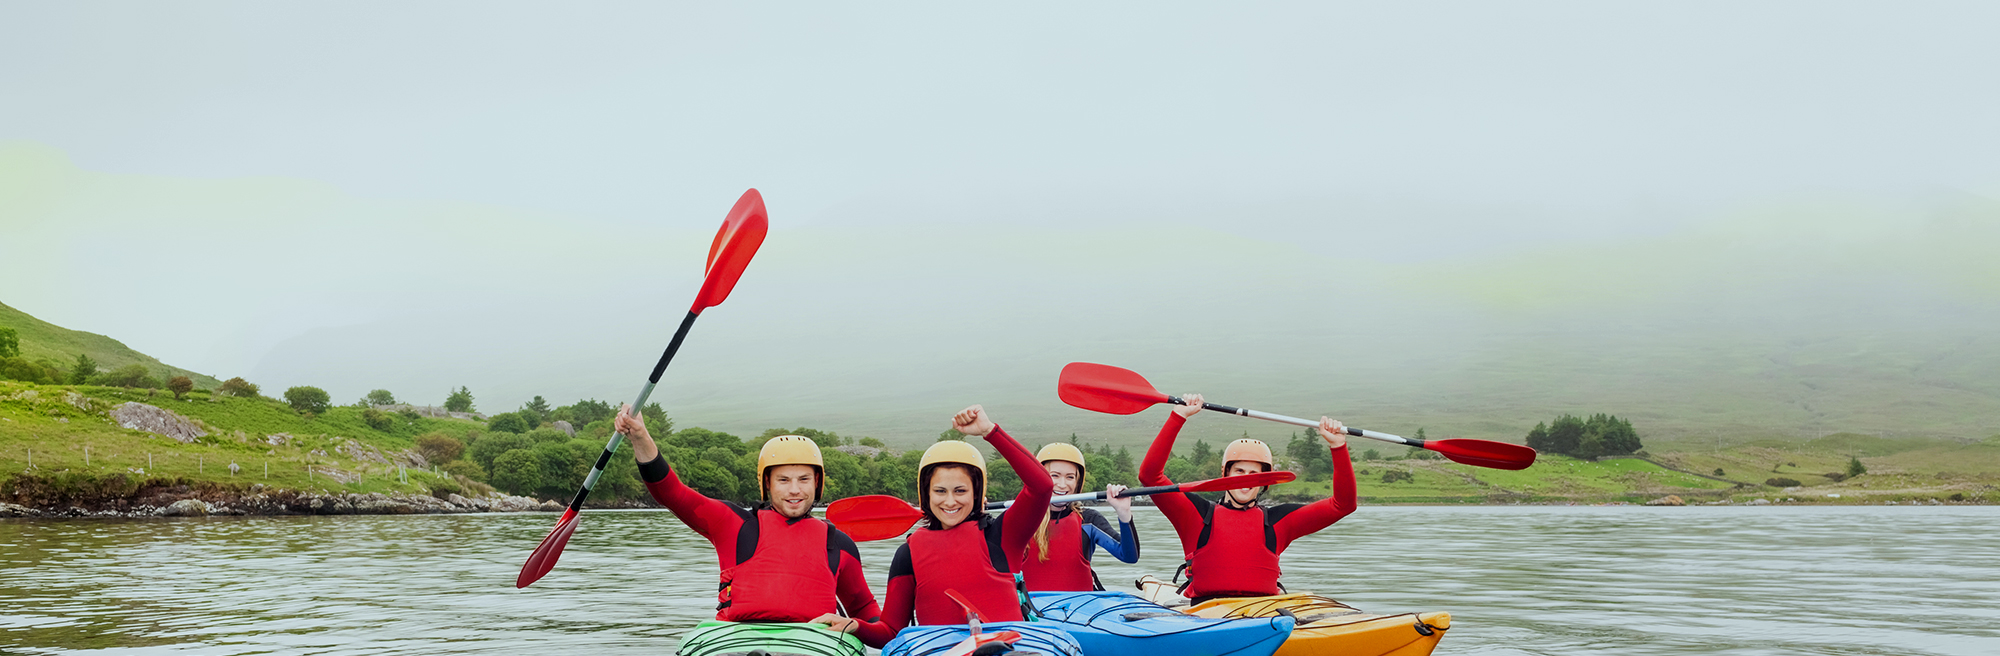 Four people in separate kayaks facing the camera. They have their oars in the air as if celebrating.